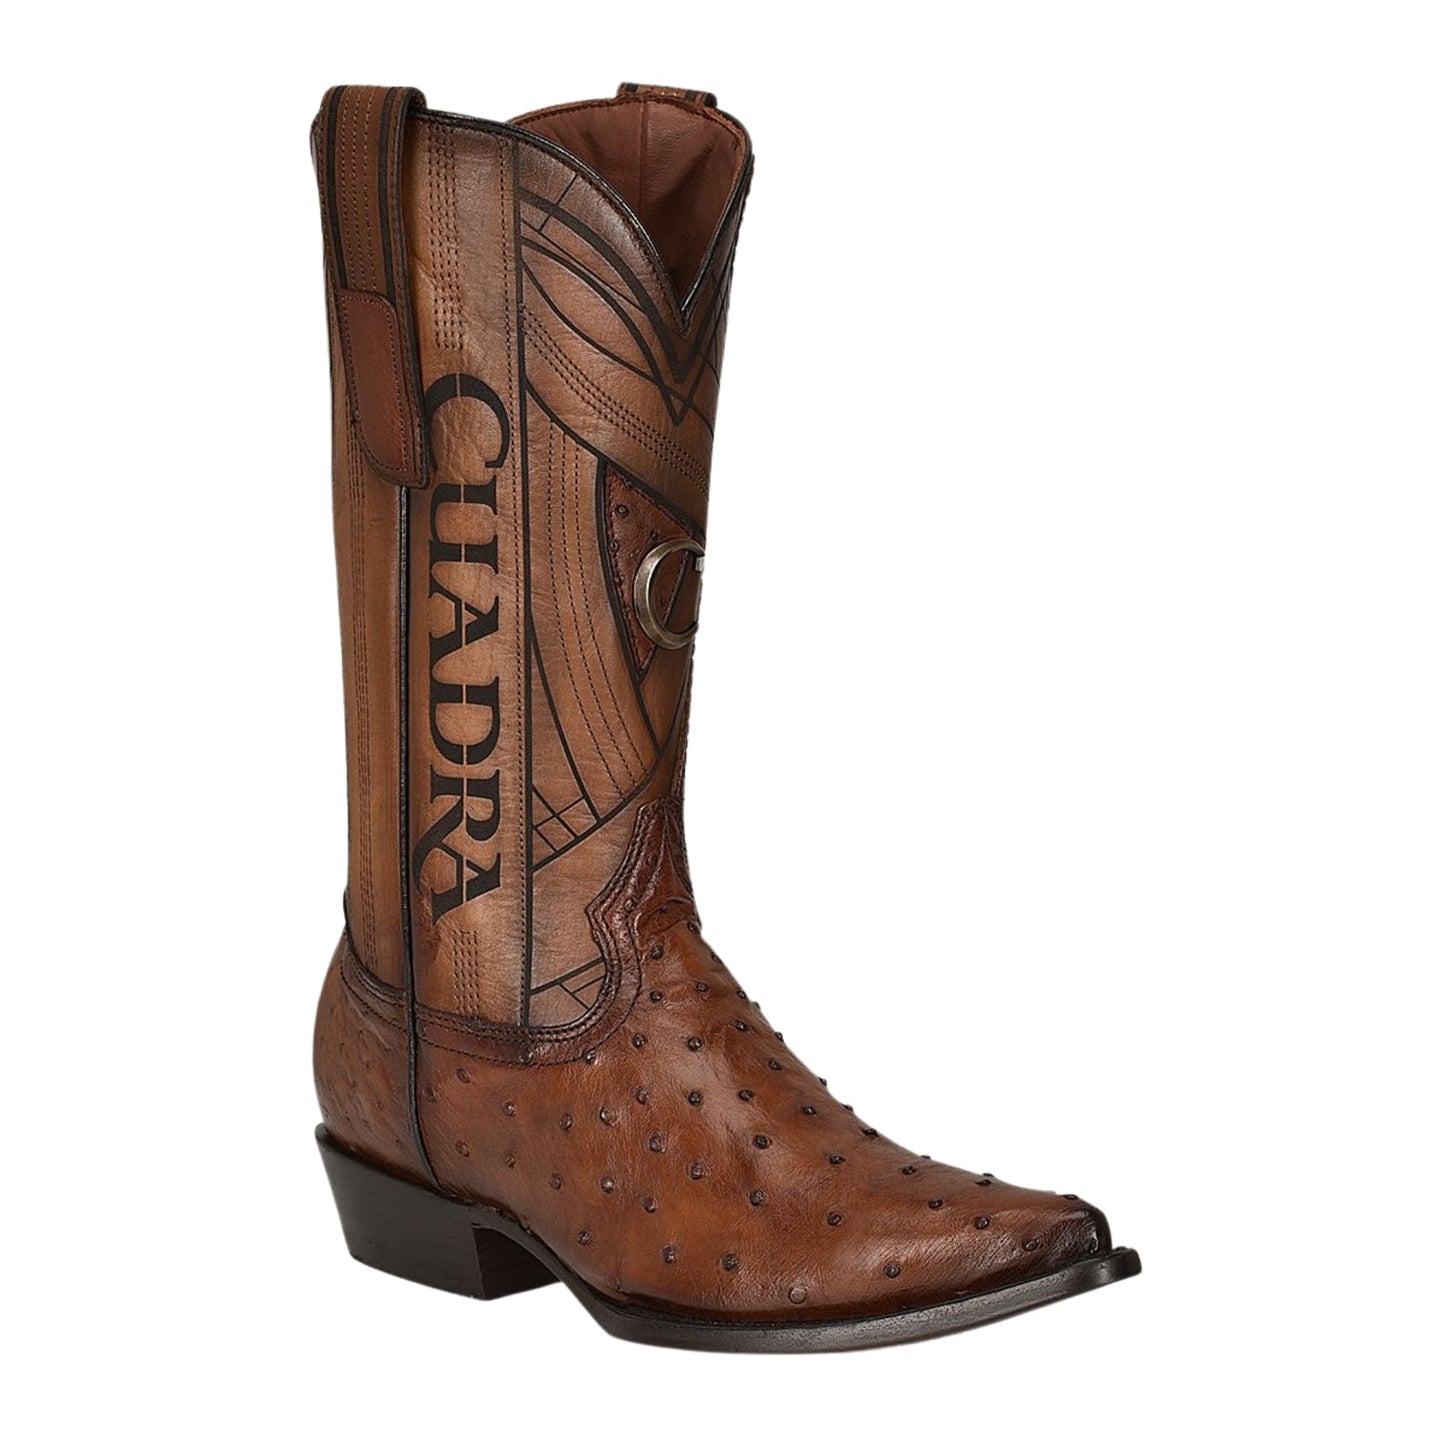 B22PA1 - Cuadra brown dress cowboy ostrich leather boots for men-Kuet.us